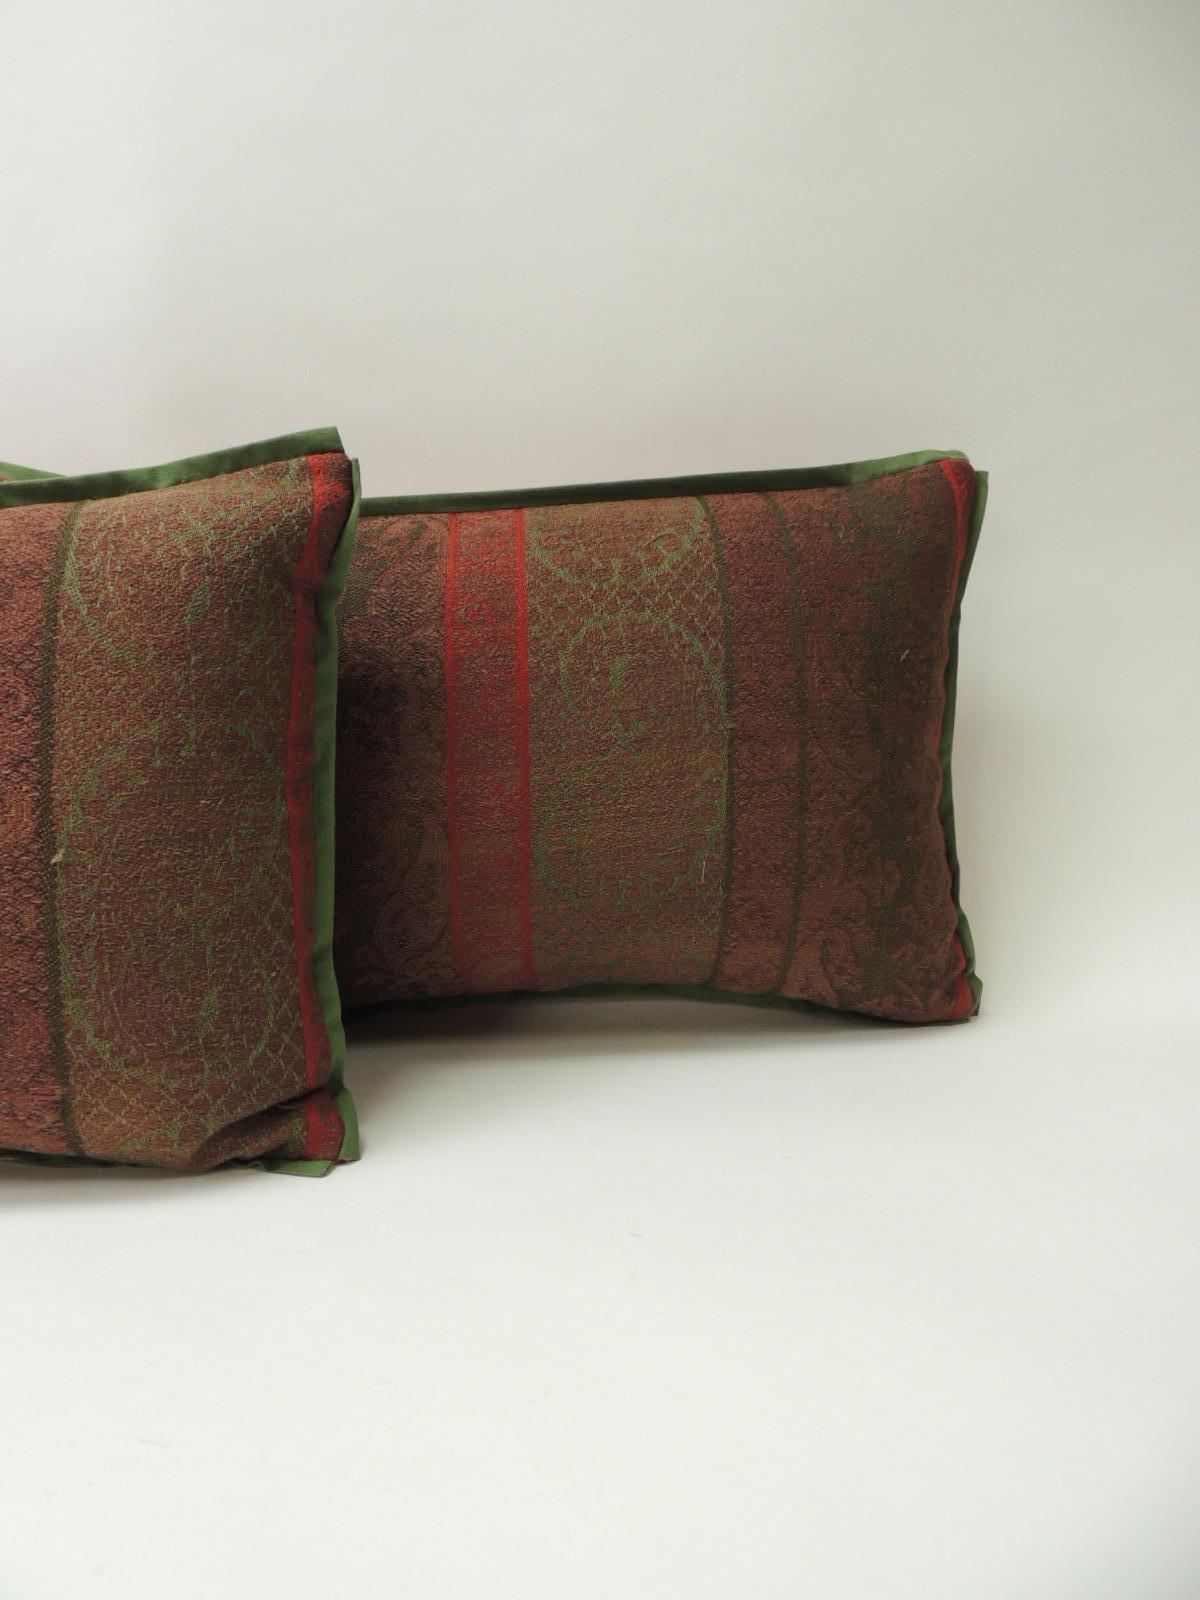 Pair of 19th century antique woven Kashmir decorative pillows with green flat cotton trim and red carriage cloth fabric backing.
In shades of brown, green, red and soft green. Handcrafted decorative pillow made with an antique textile fragment from